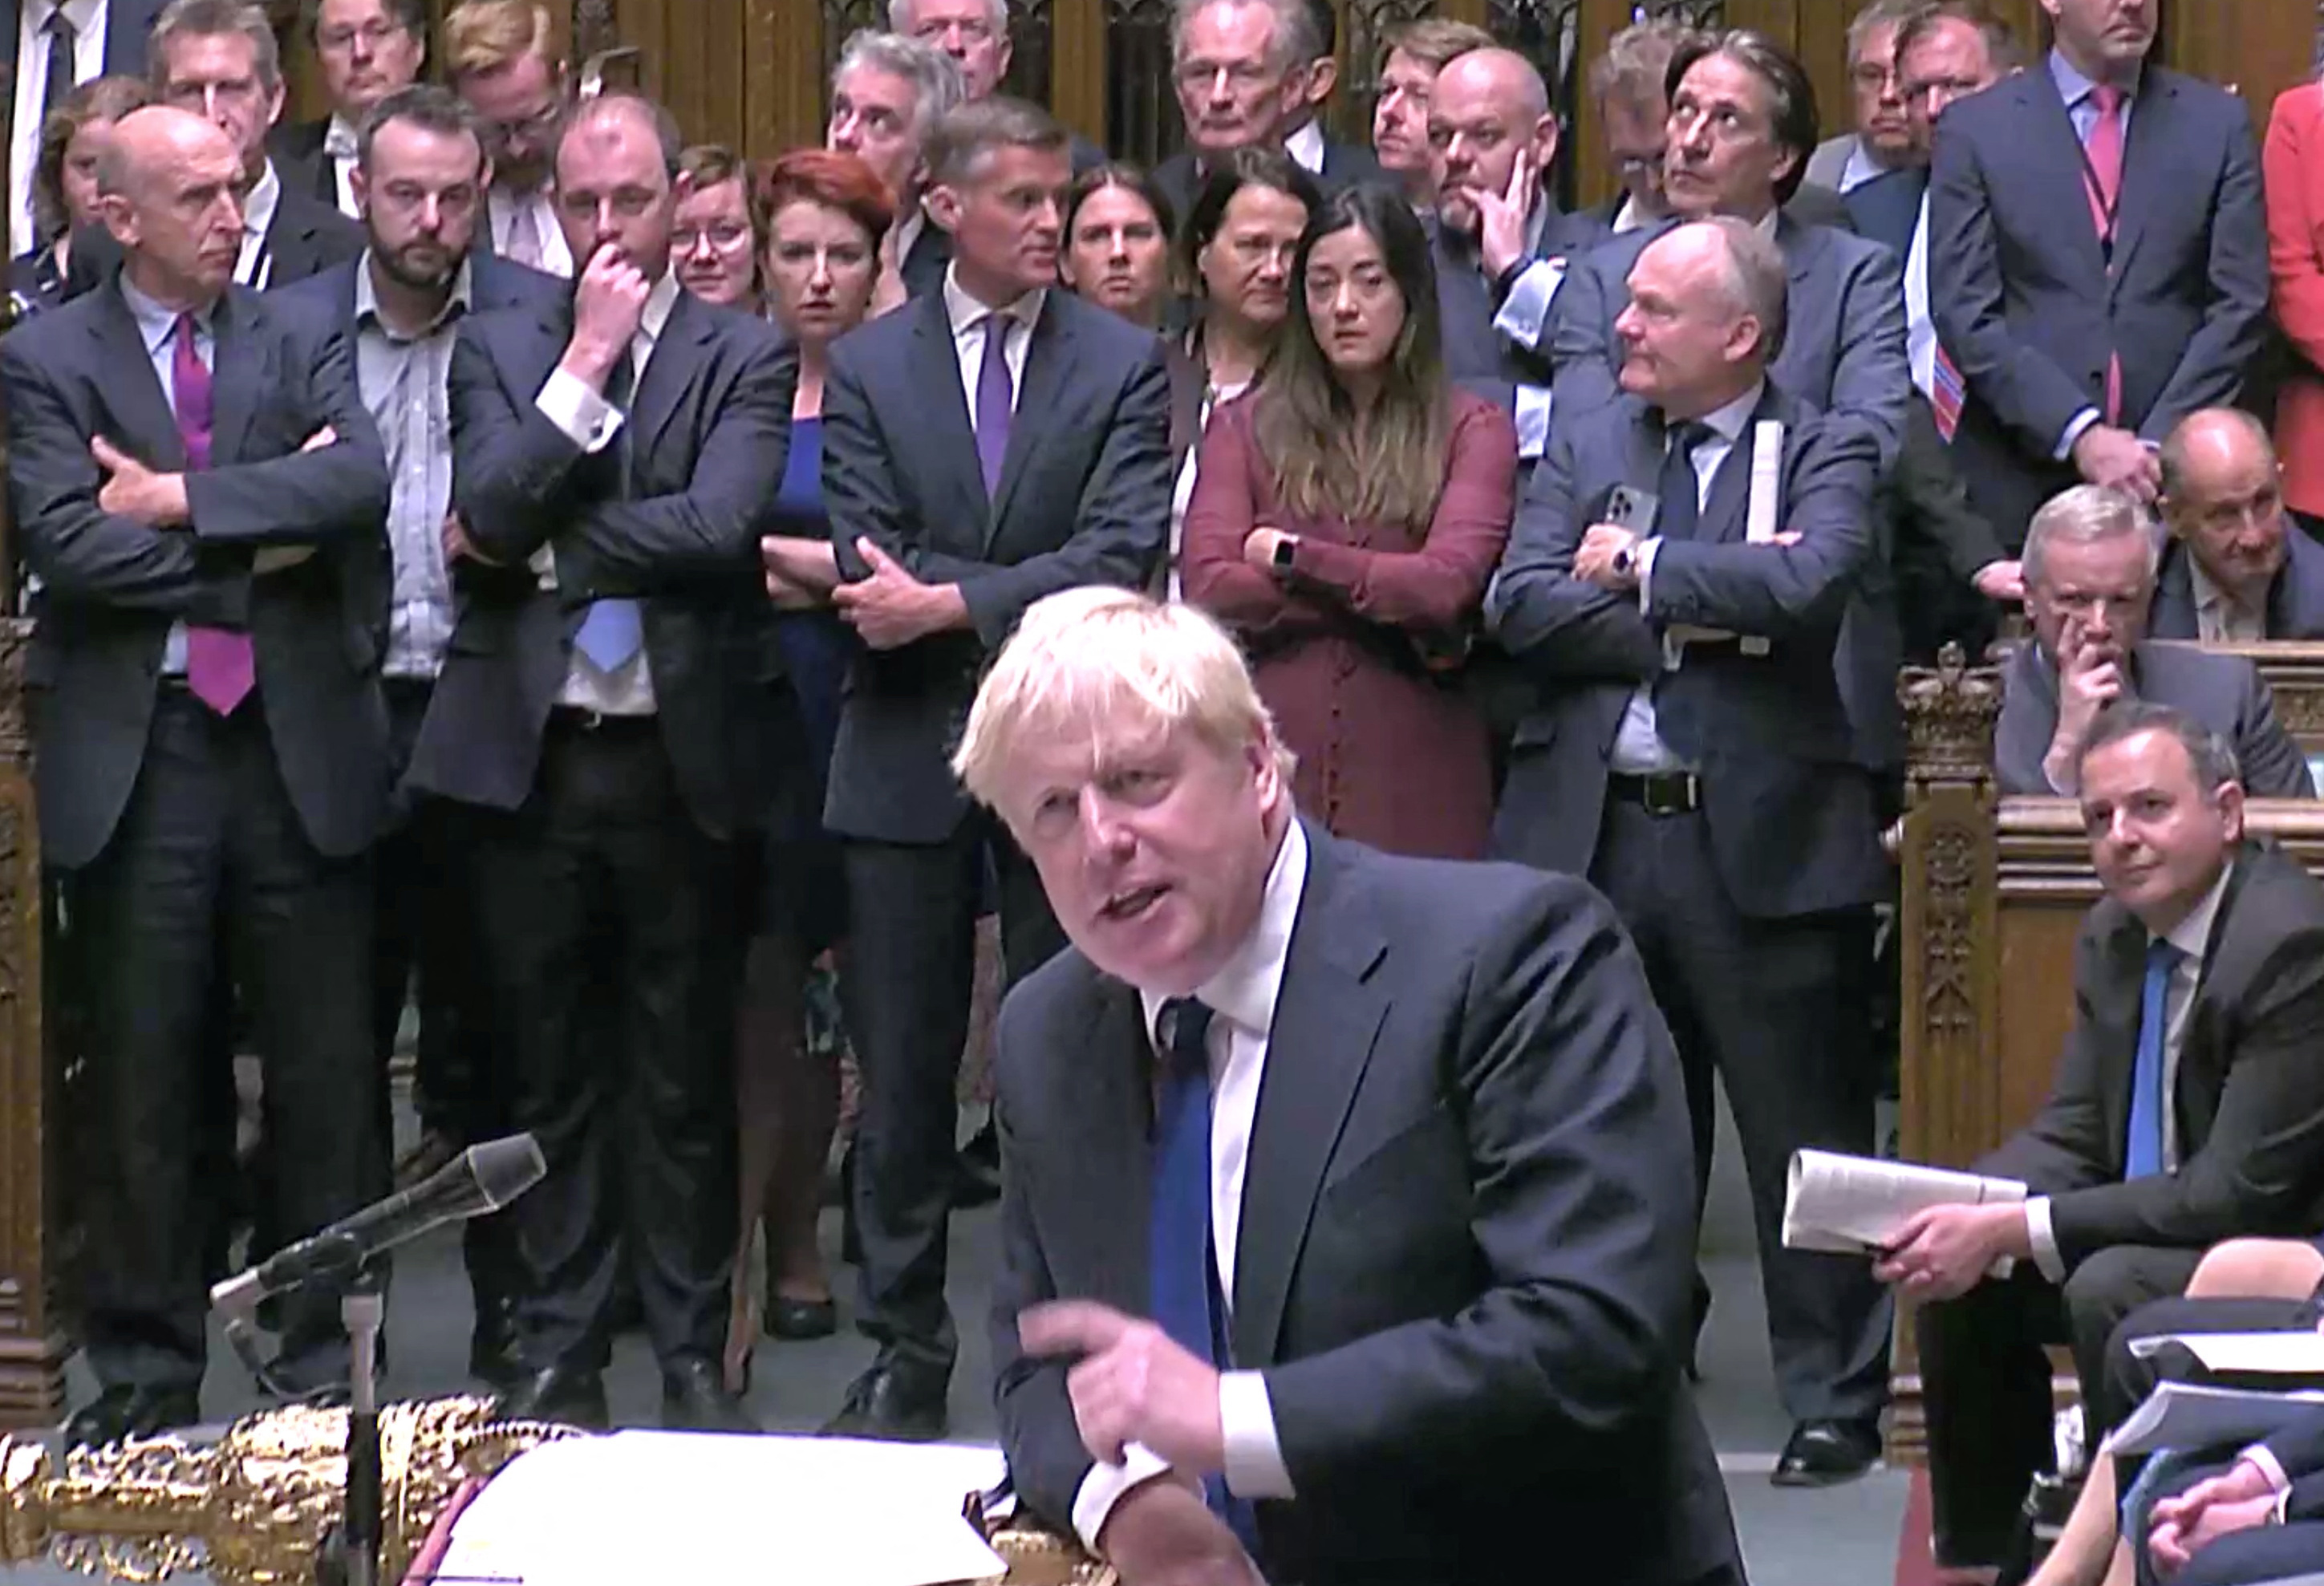 British PM Johnson attends weekly question time debate in London